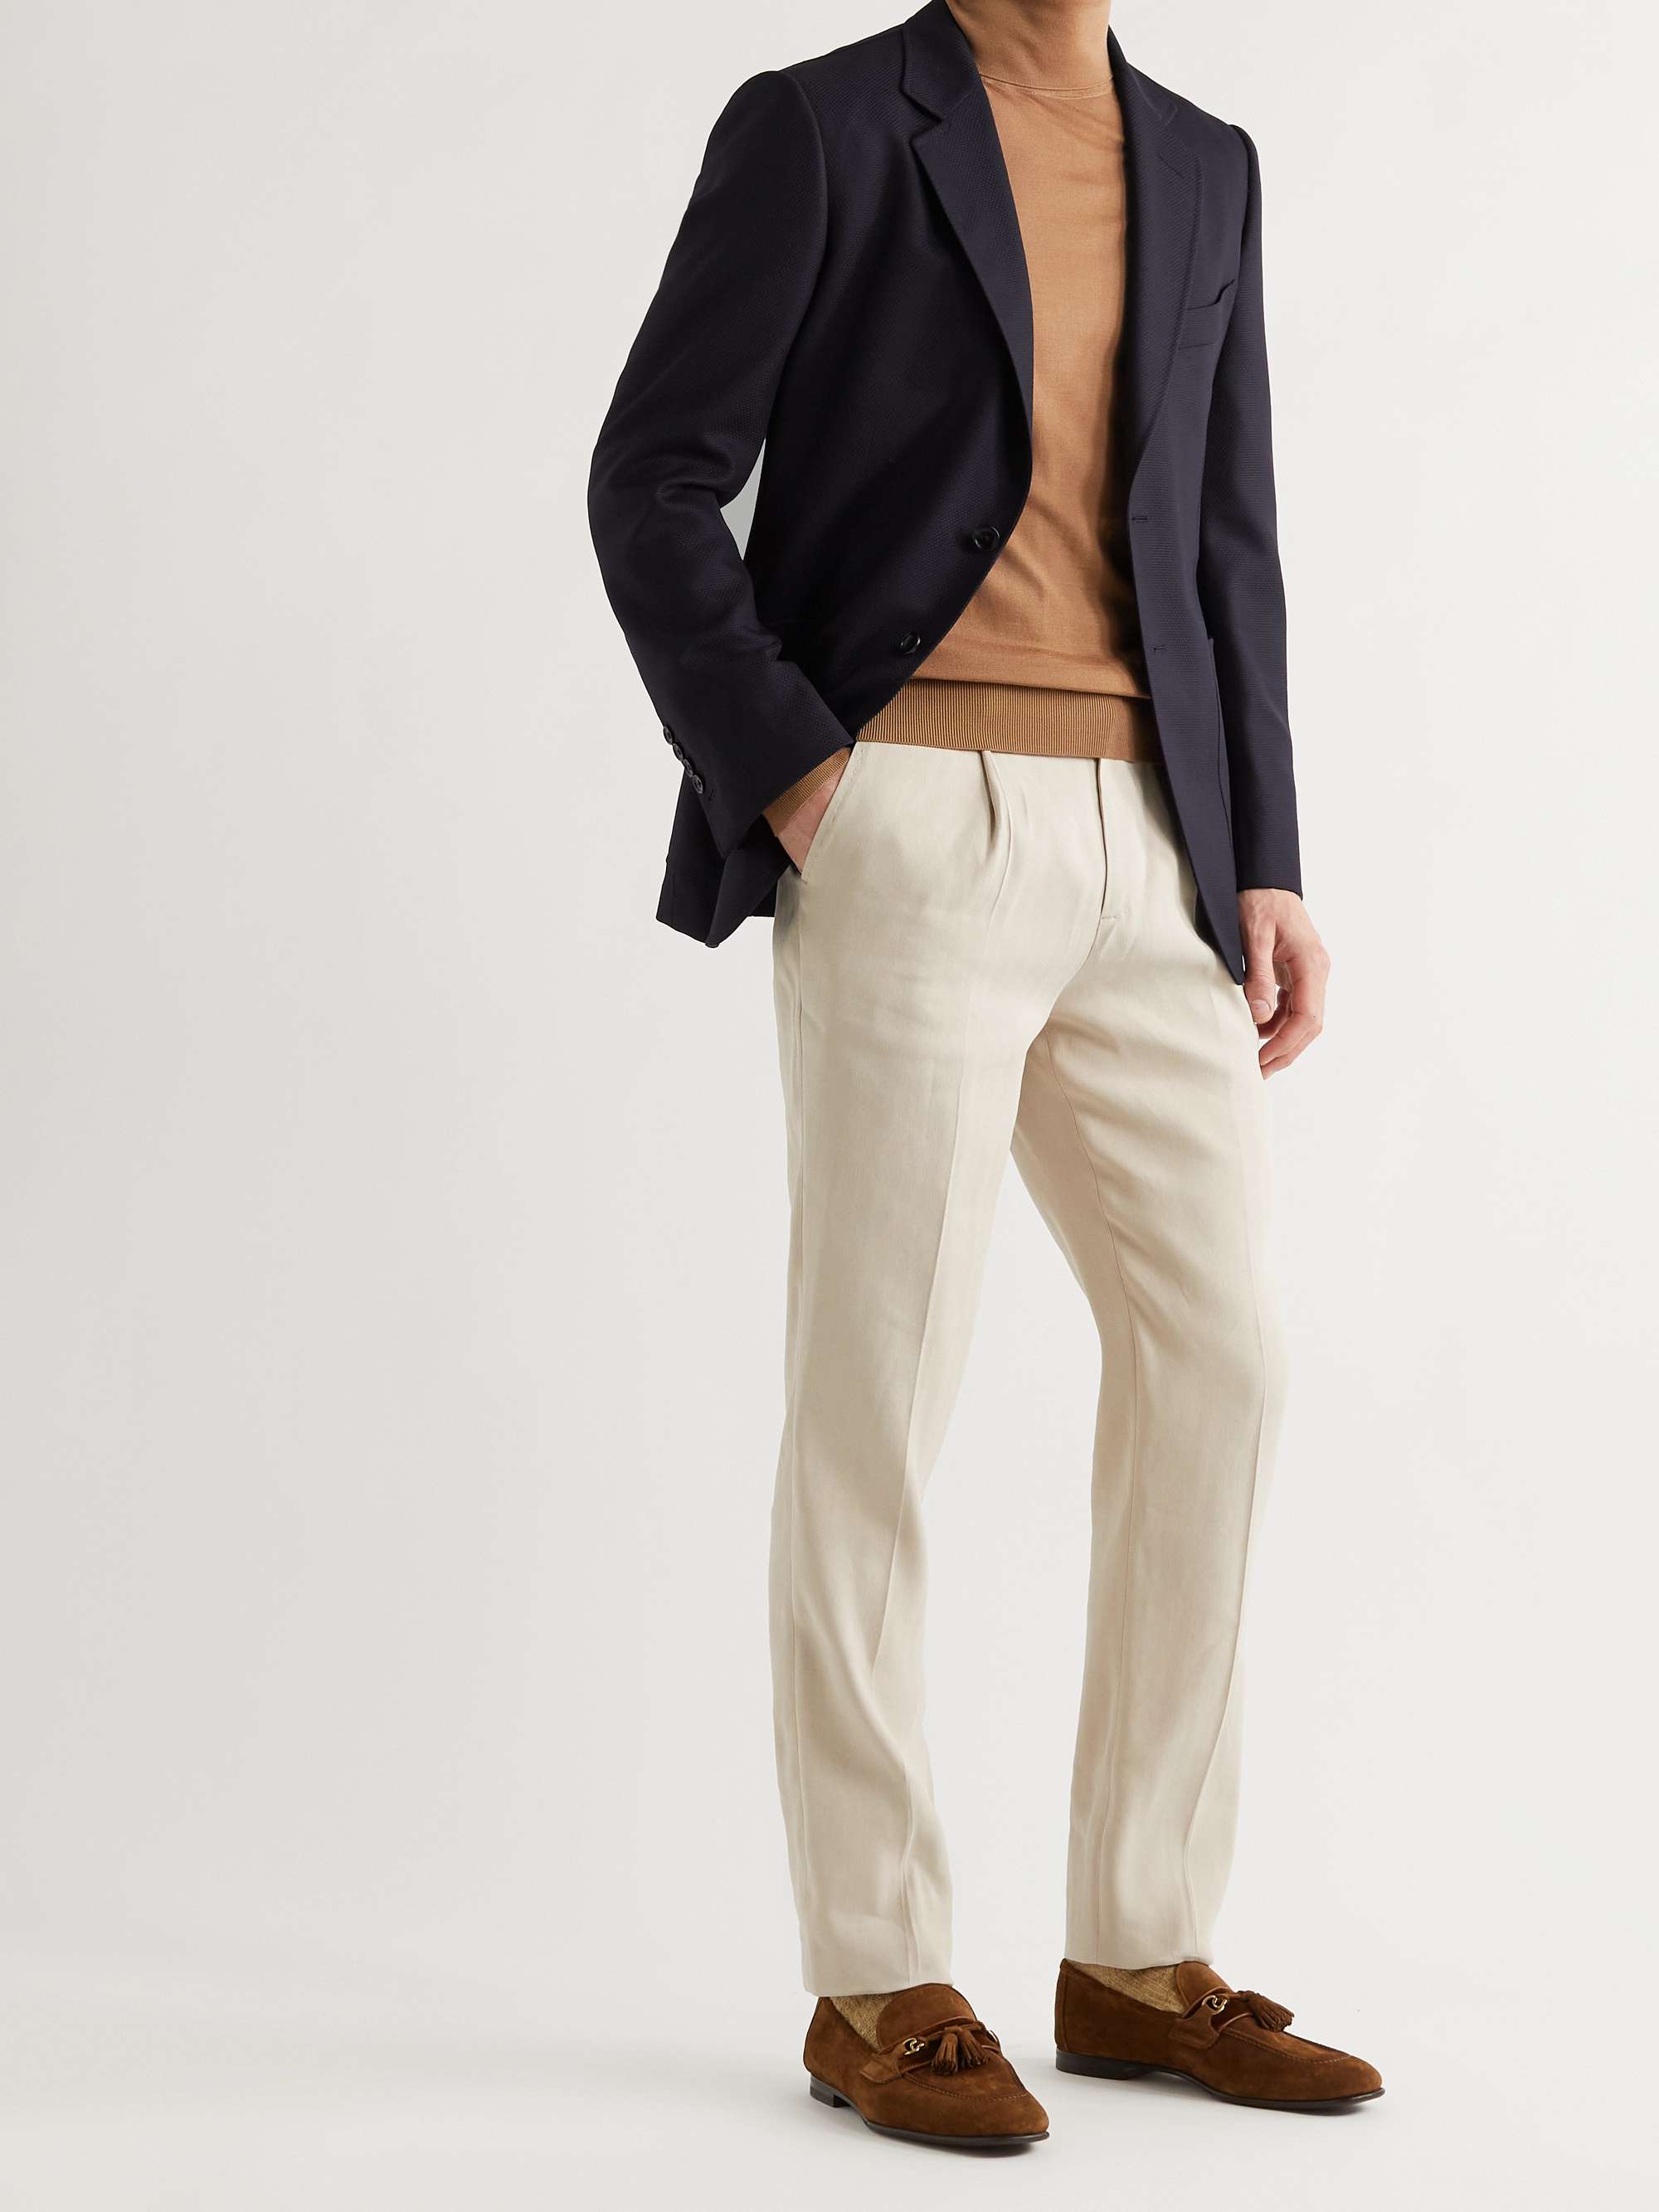 TOM FORD O'Connor Slim-Fit Unstructured Wool-Mesh Blazer